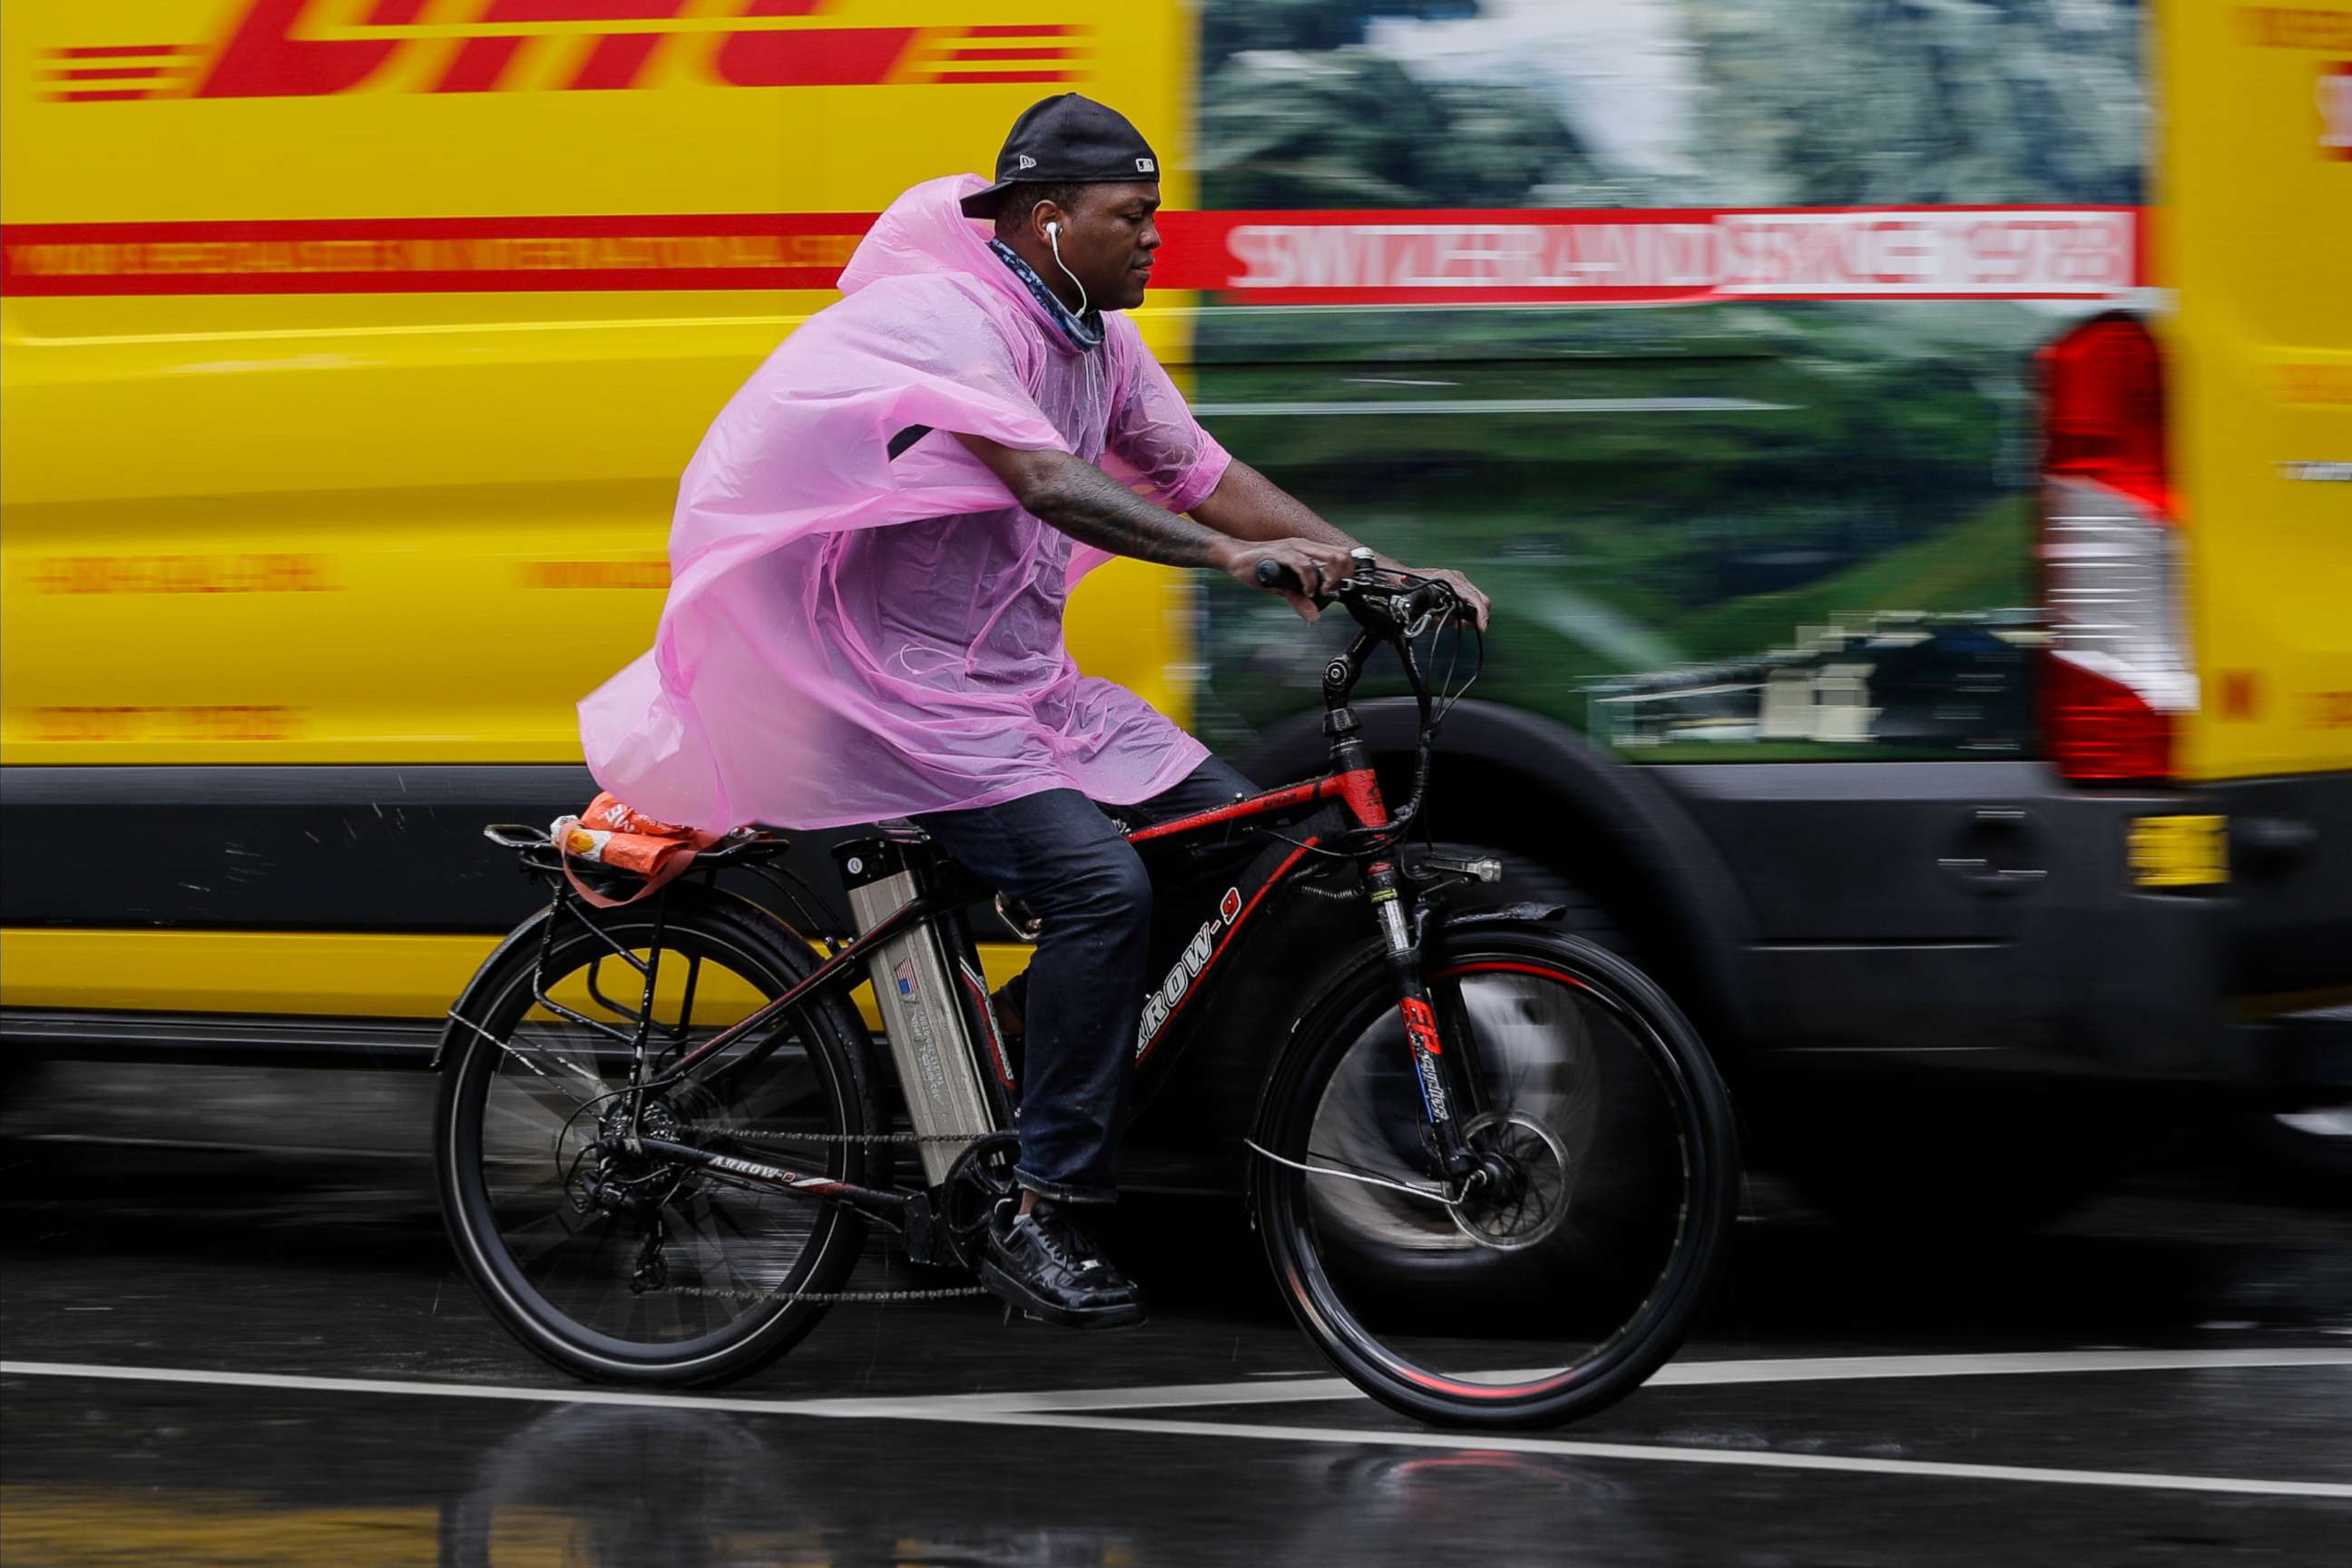 PHOTO: A cyclist uses a plastic rain as protection from rain brought by Tropical Storm Fay, July 10, 2020, in New York.